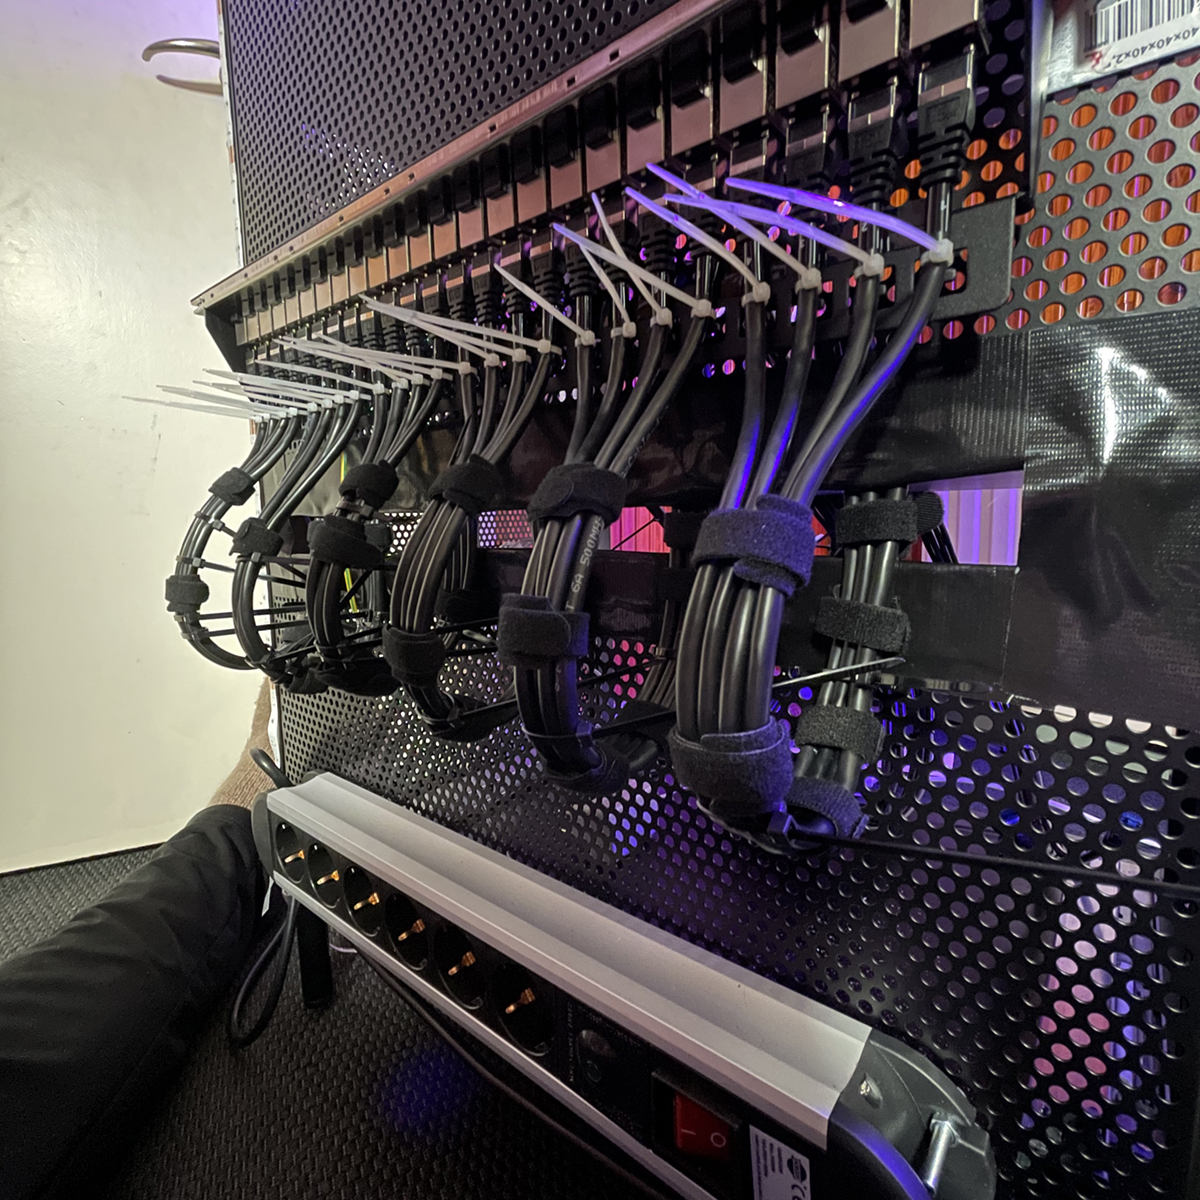 Rack cabinet from behind with cabling